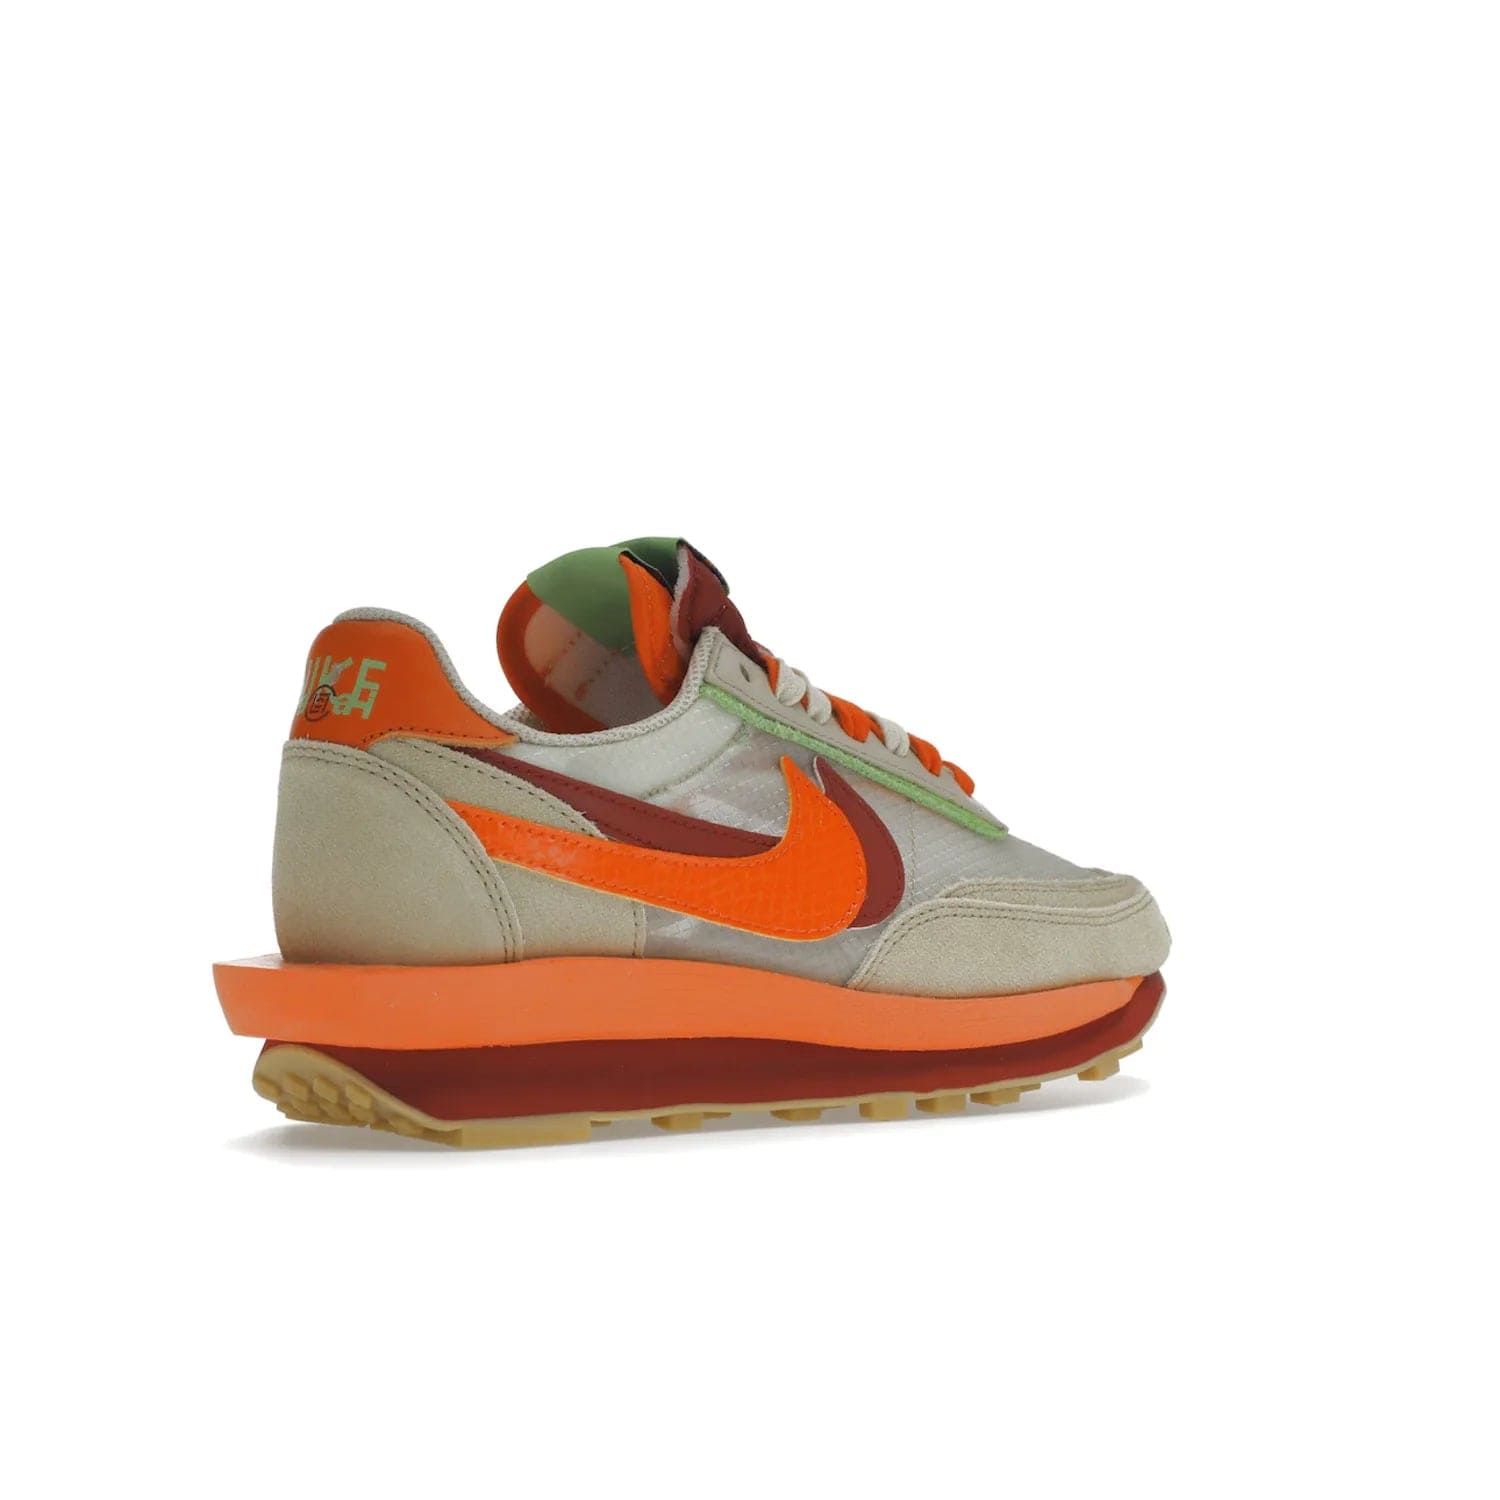 Nike LD Waffle sacai CLOT Kiss of Death Net Orange Blaze - Image 33 - Only at www.BallersClubKickz.com - A bold and stylish Nike LD Waffle sacai CLOT Kiss of Death Net Orange Blaze sneaker featuring a unique off-white, Deep Red & Orange Blaze Swooshes, two-toned stacked sole and doubled tongue. Available in September 2021. Make a statement.